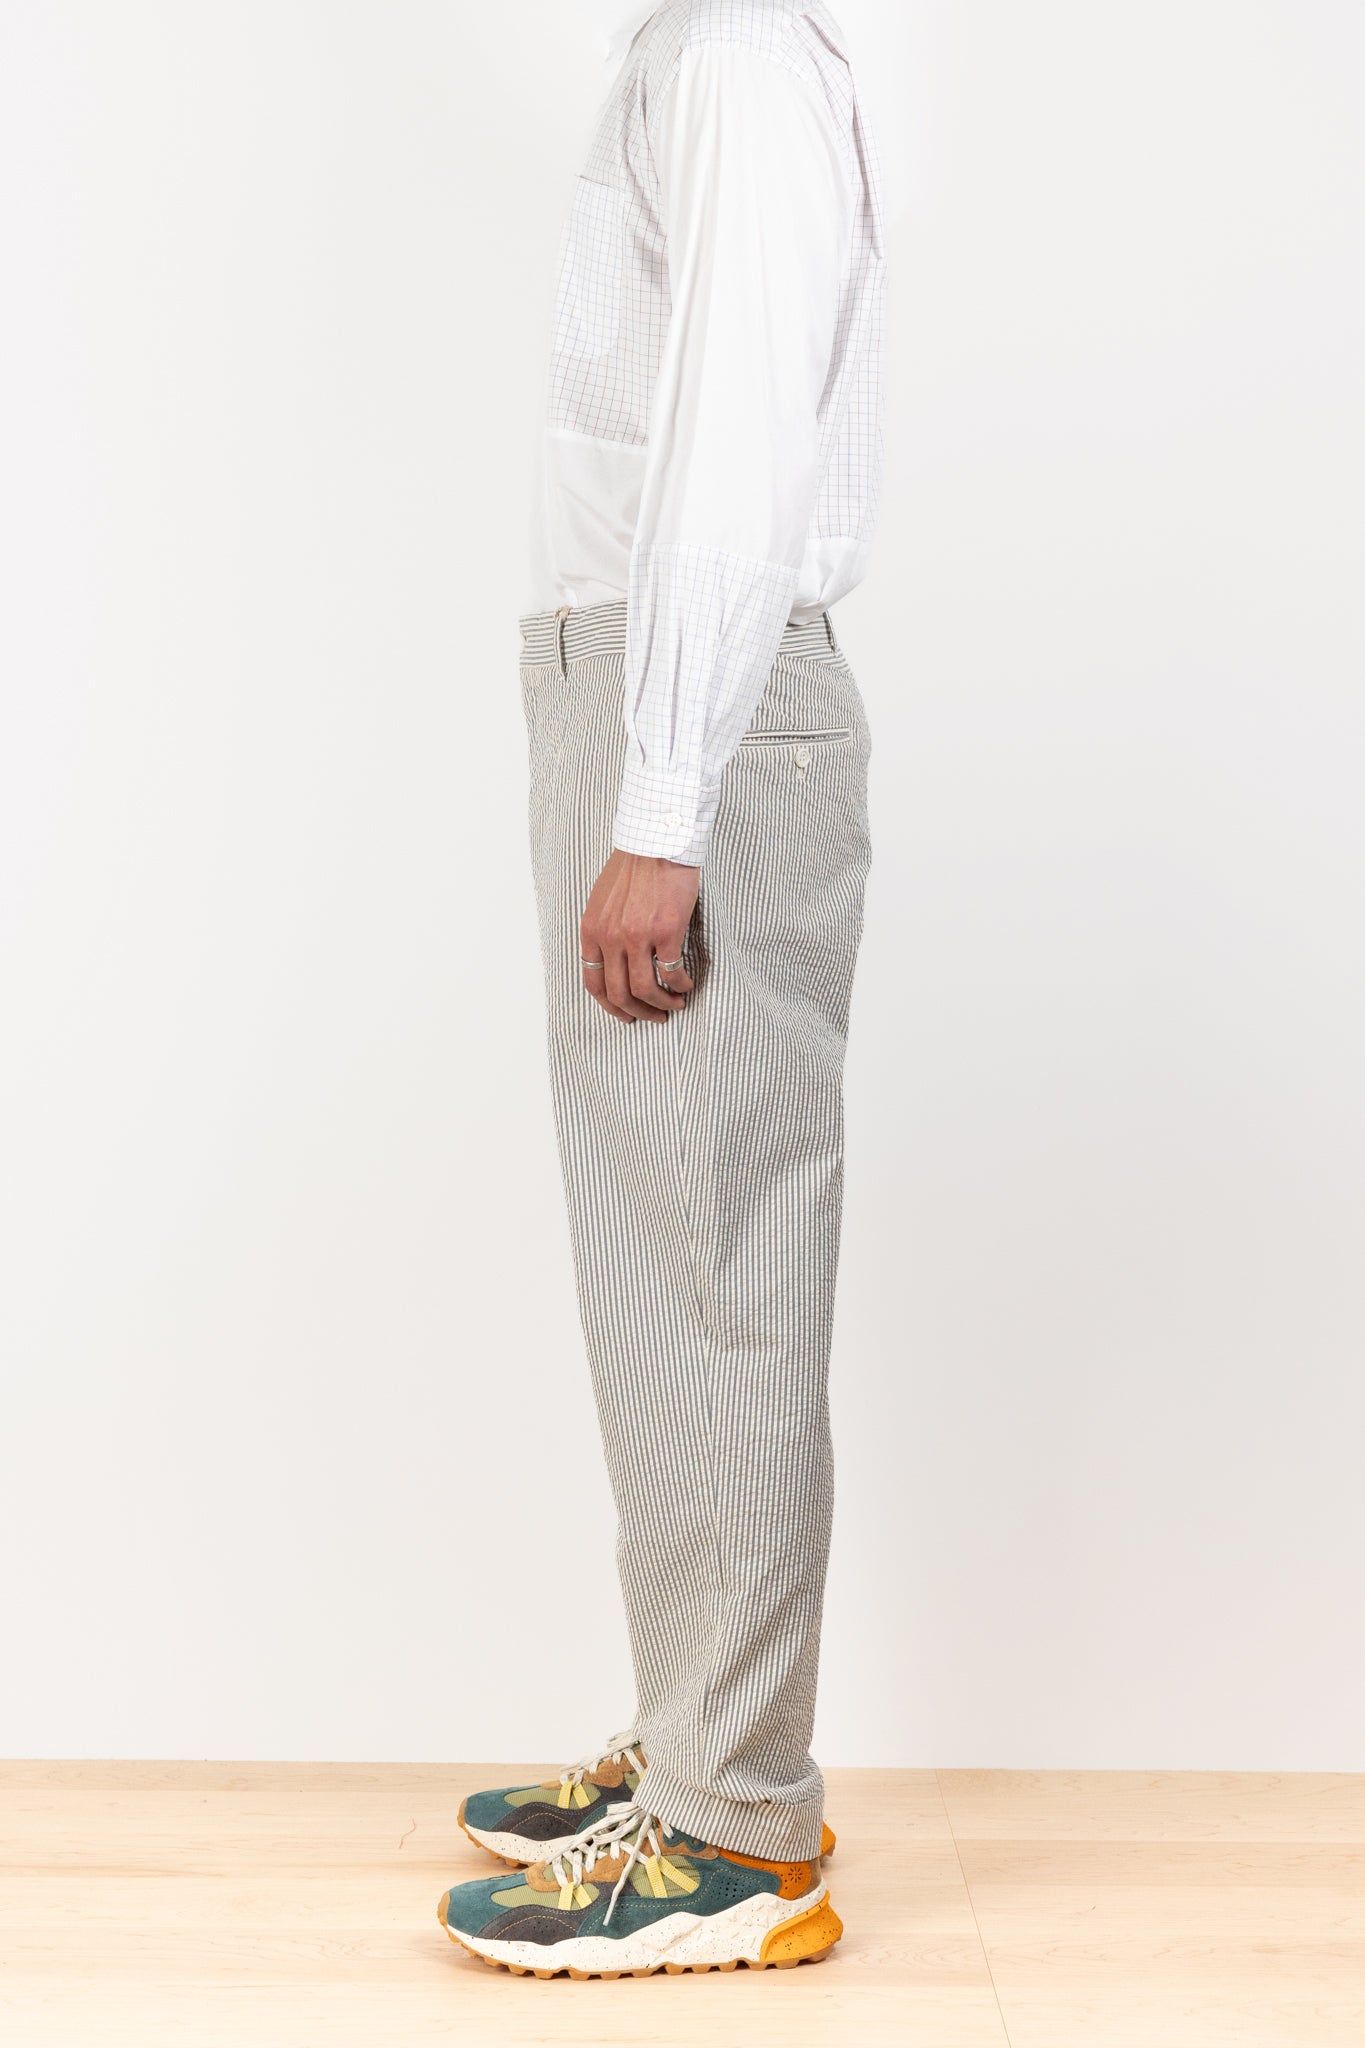 Andover Pant